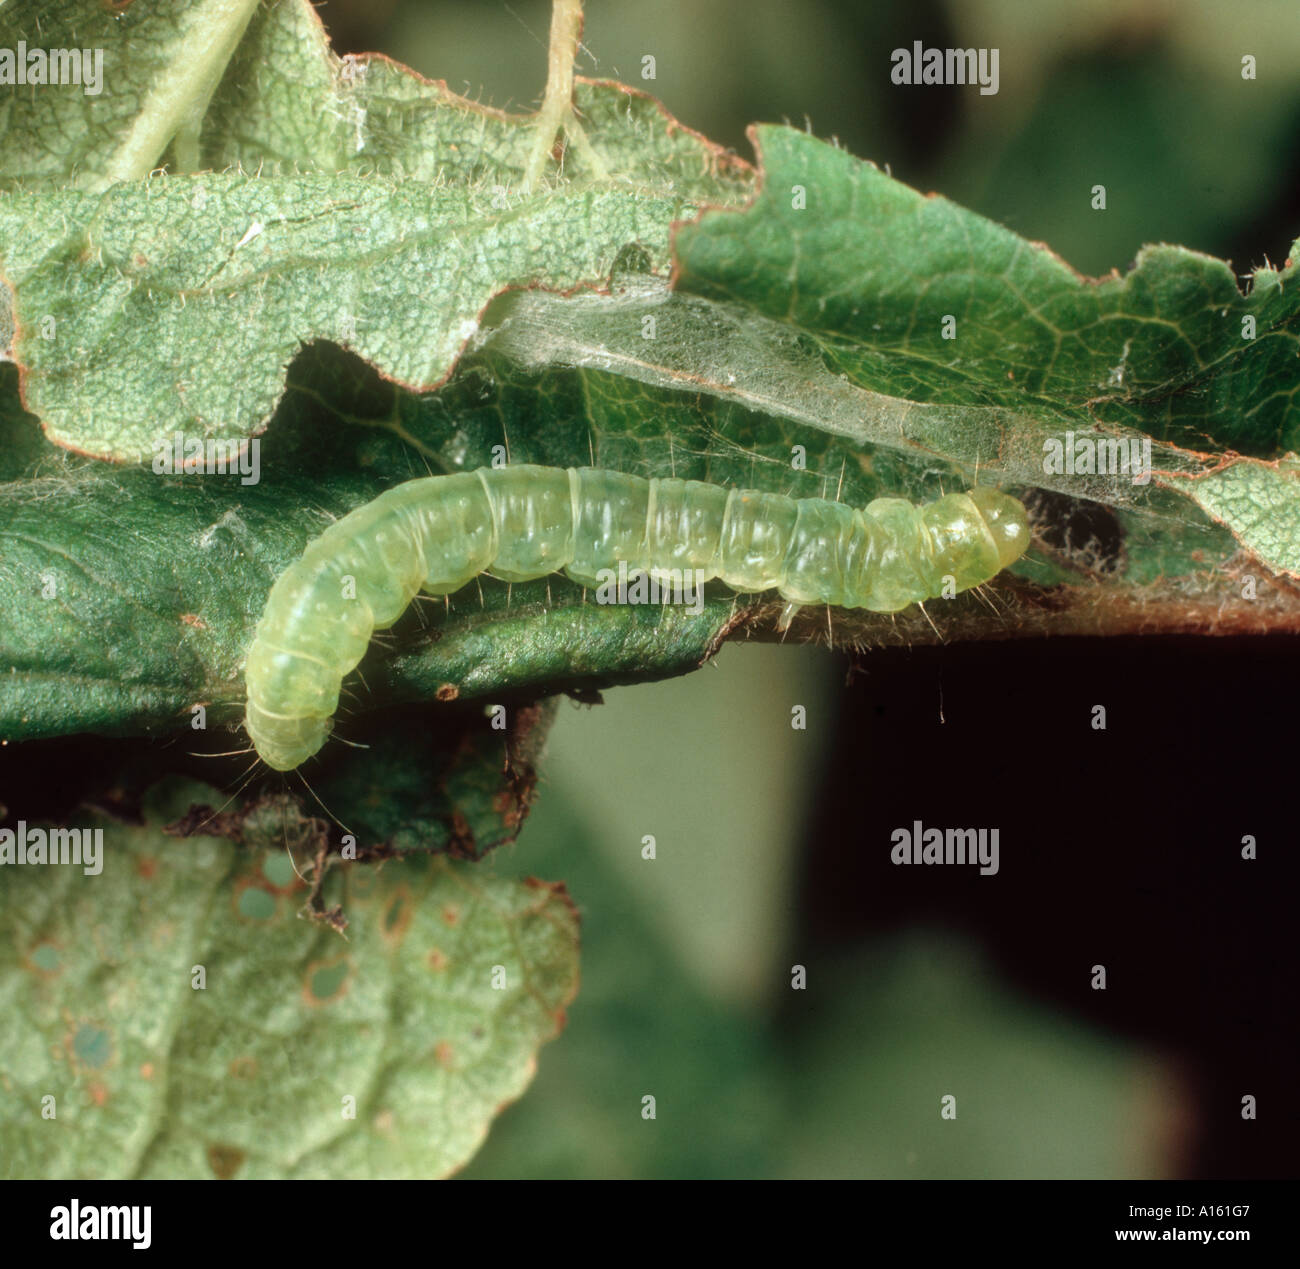 Summer fruit tortrix Adoxophyes orana caterpillar in rolled up plum leaf Stock Photo